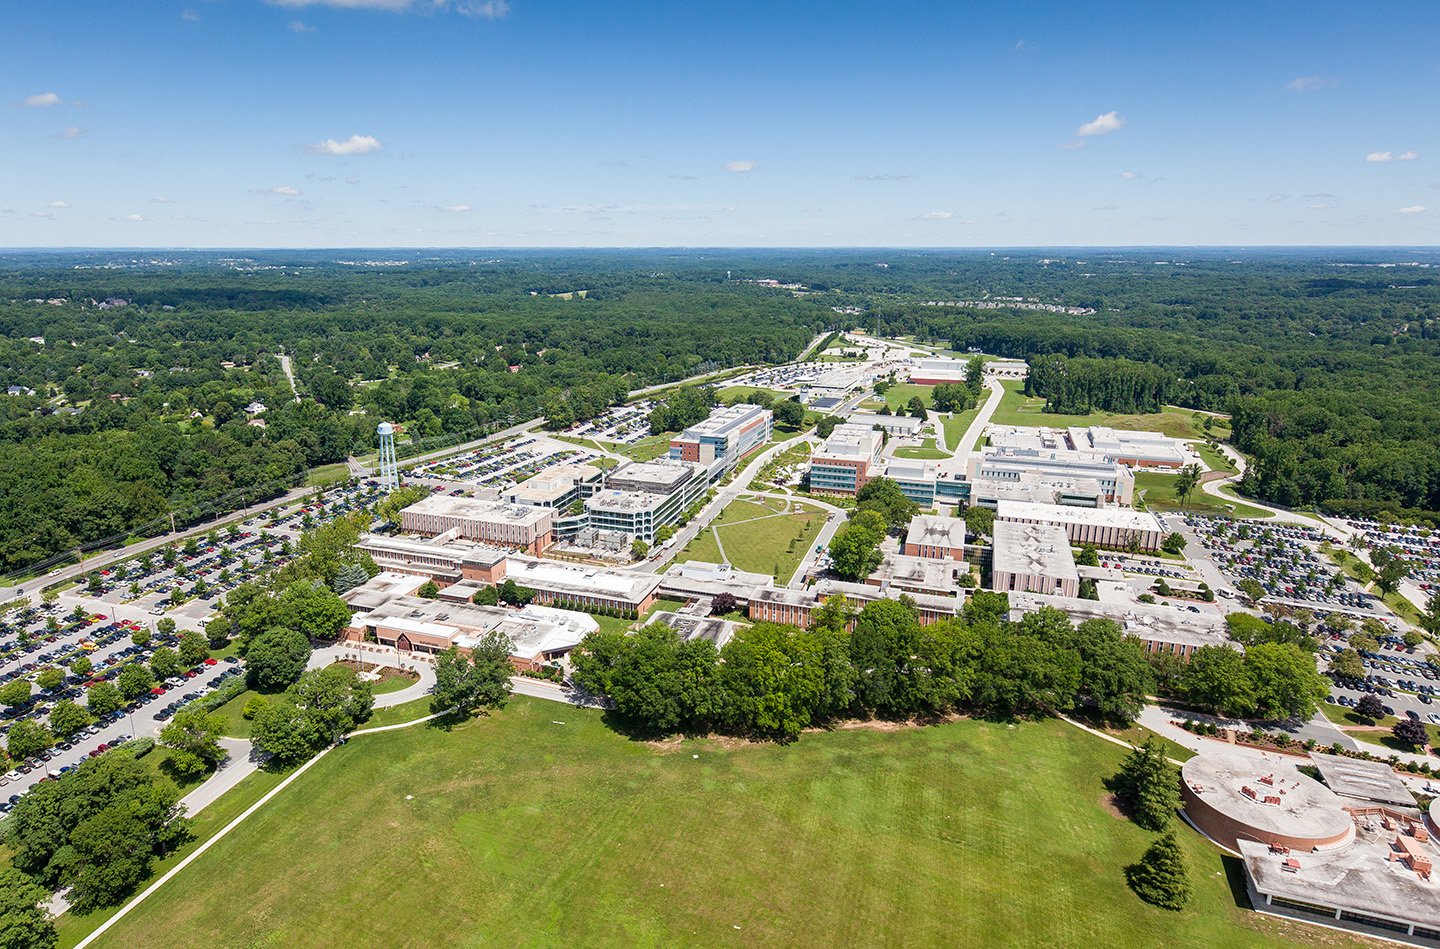 Aerial view of Johns Hopkins APL's campus